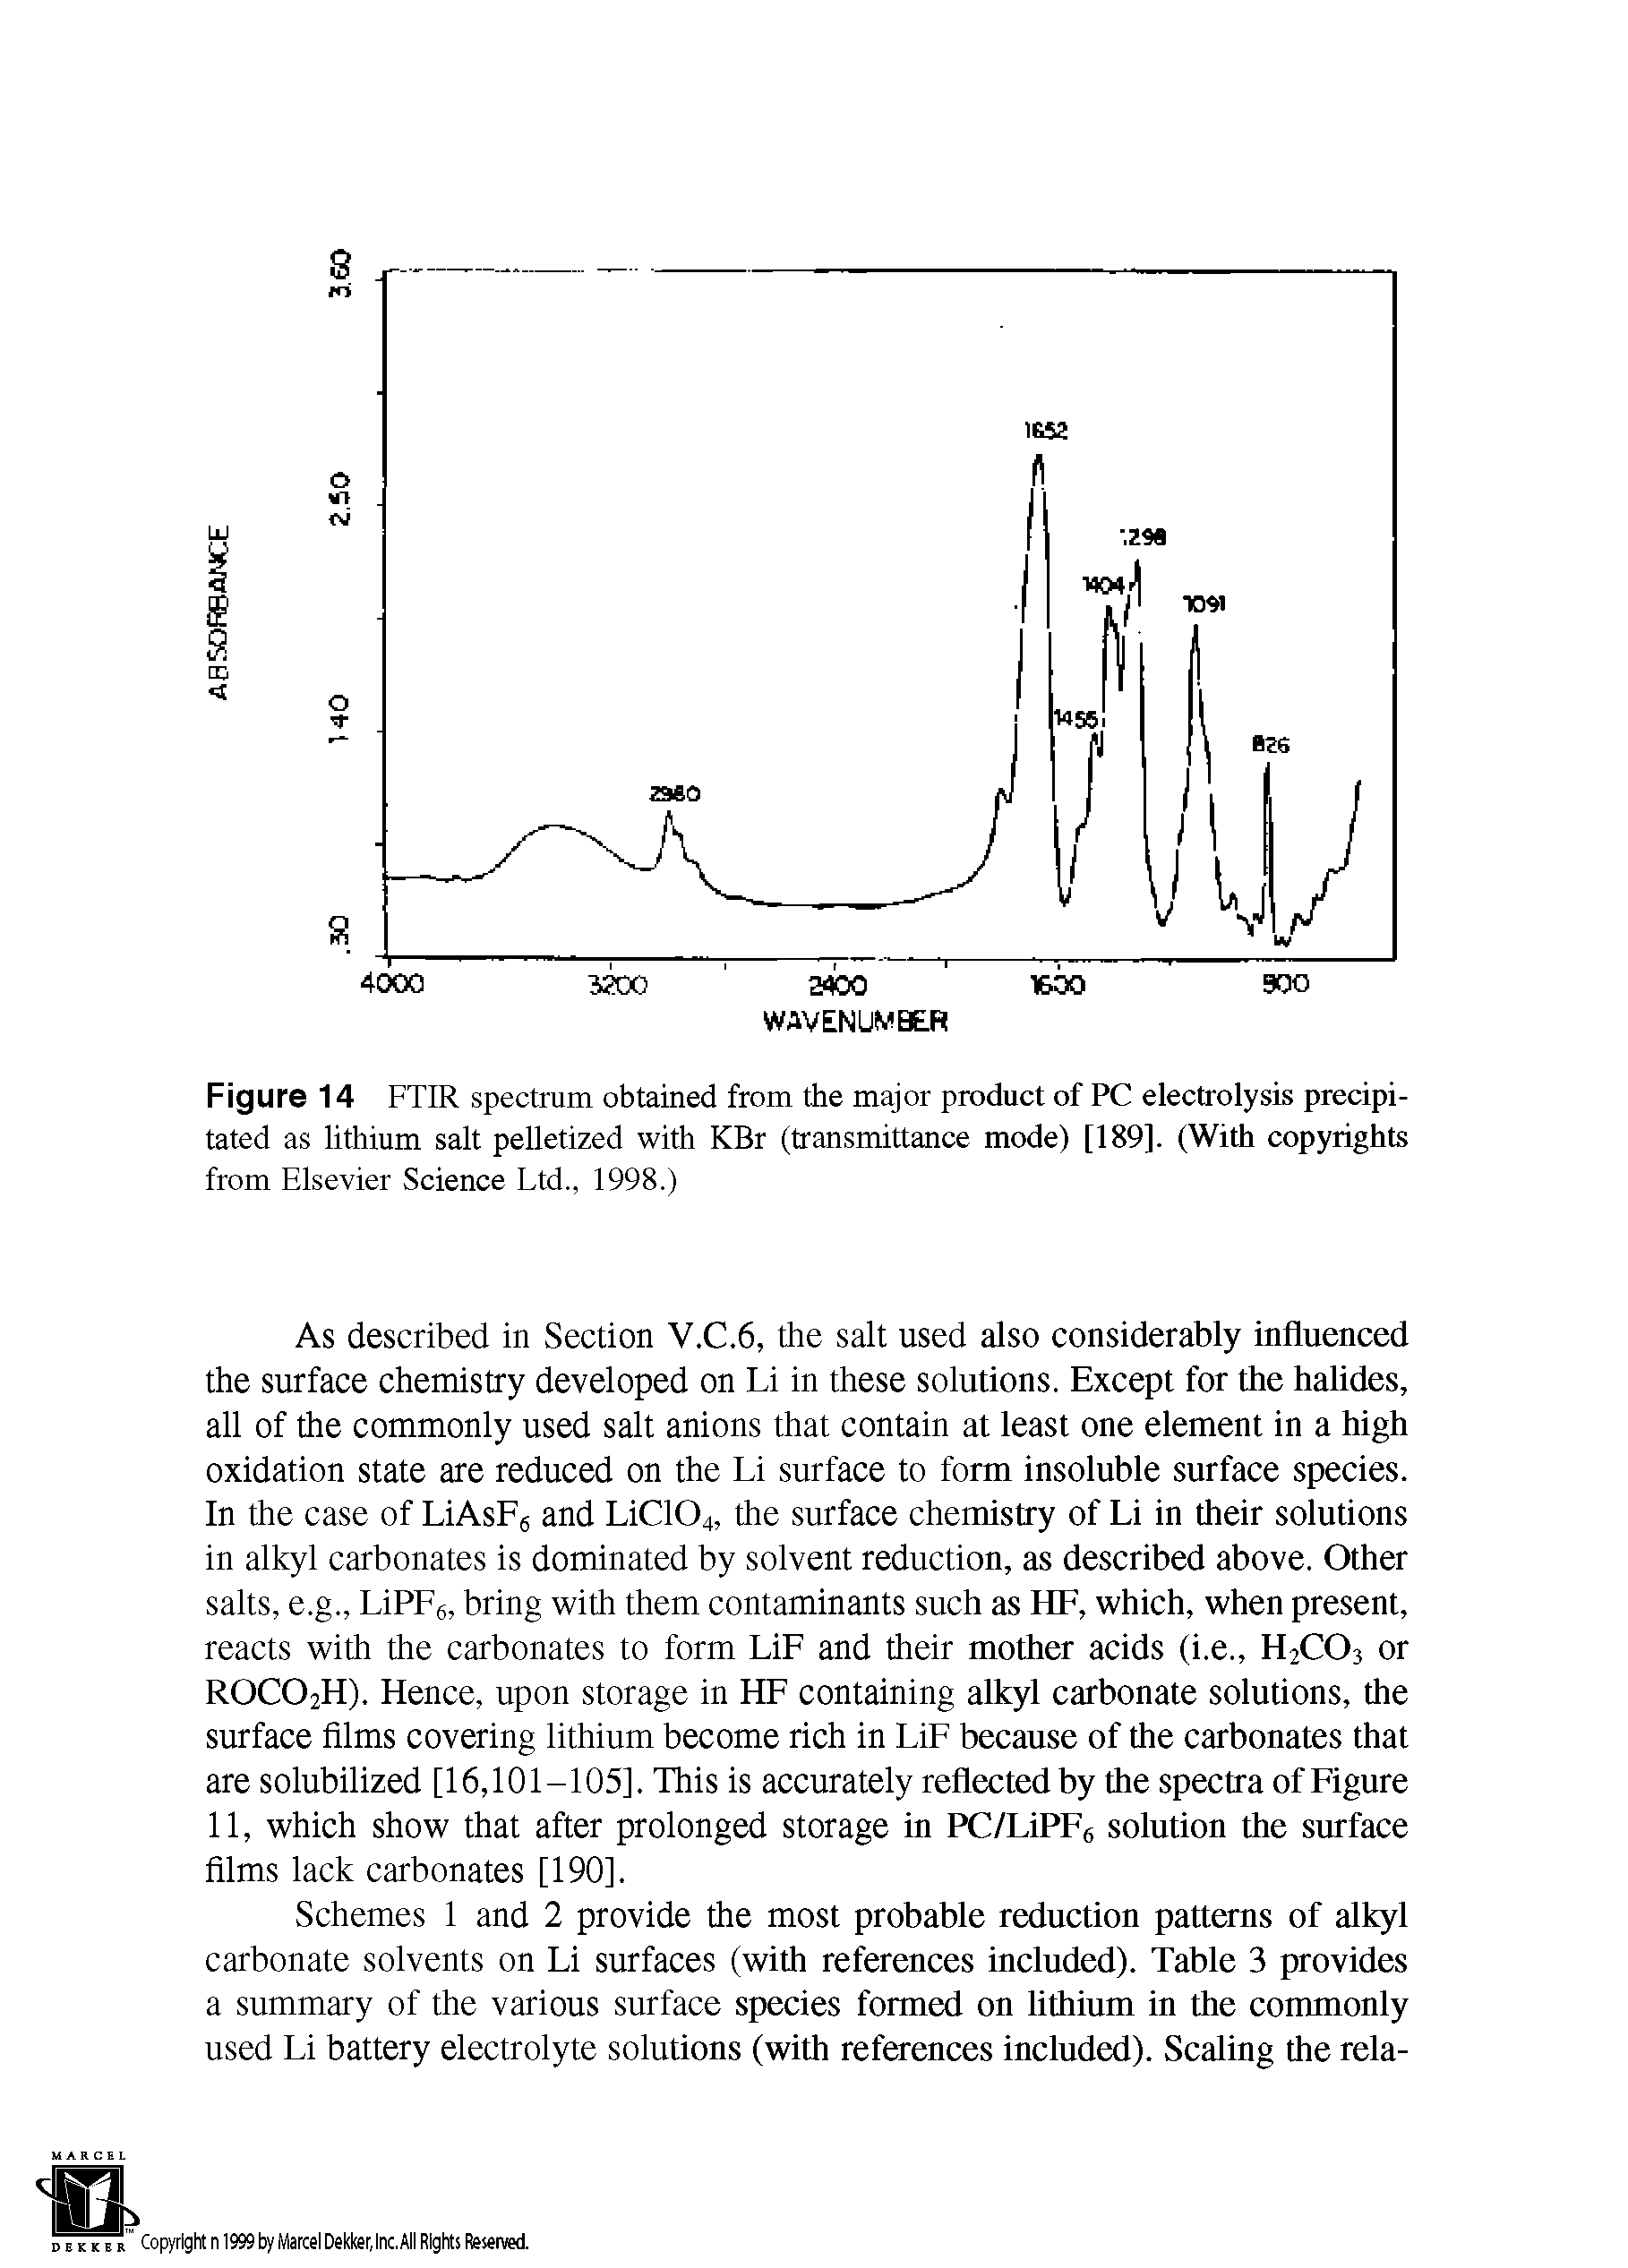 Schemes 1 and 2 provide the most probable reduction patterns of alkyl carbonate solvents on Li surfaces (with references included). Table 3 provides a summary of the various surface species formed on lithium in the commonly used Li battery electrolyte solutions (with references included). Scaling the rela-...